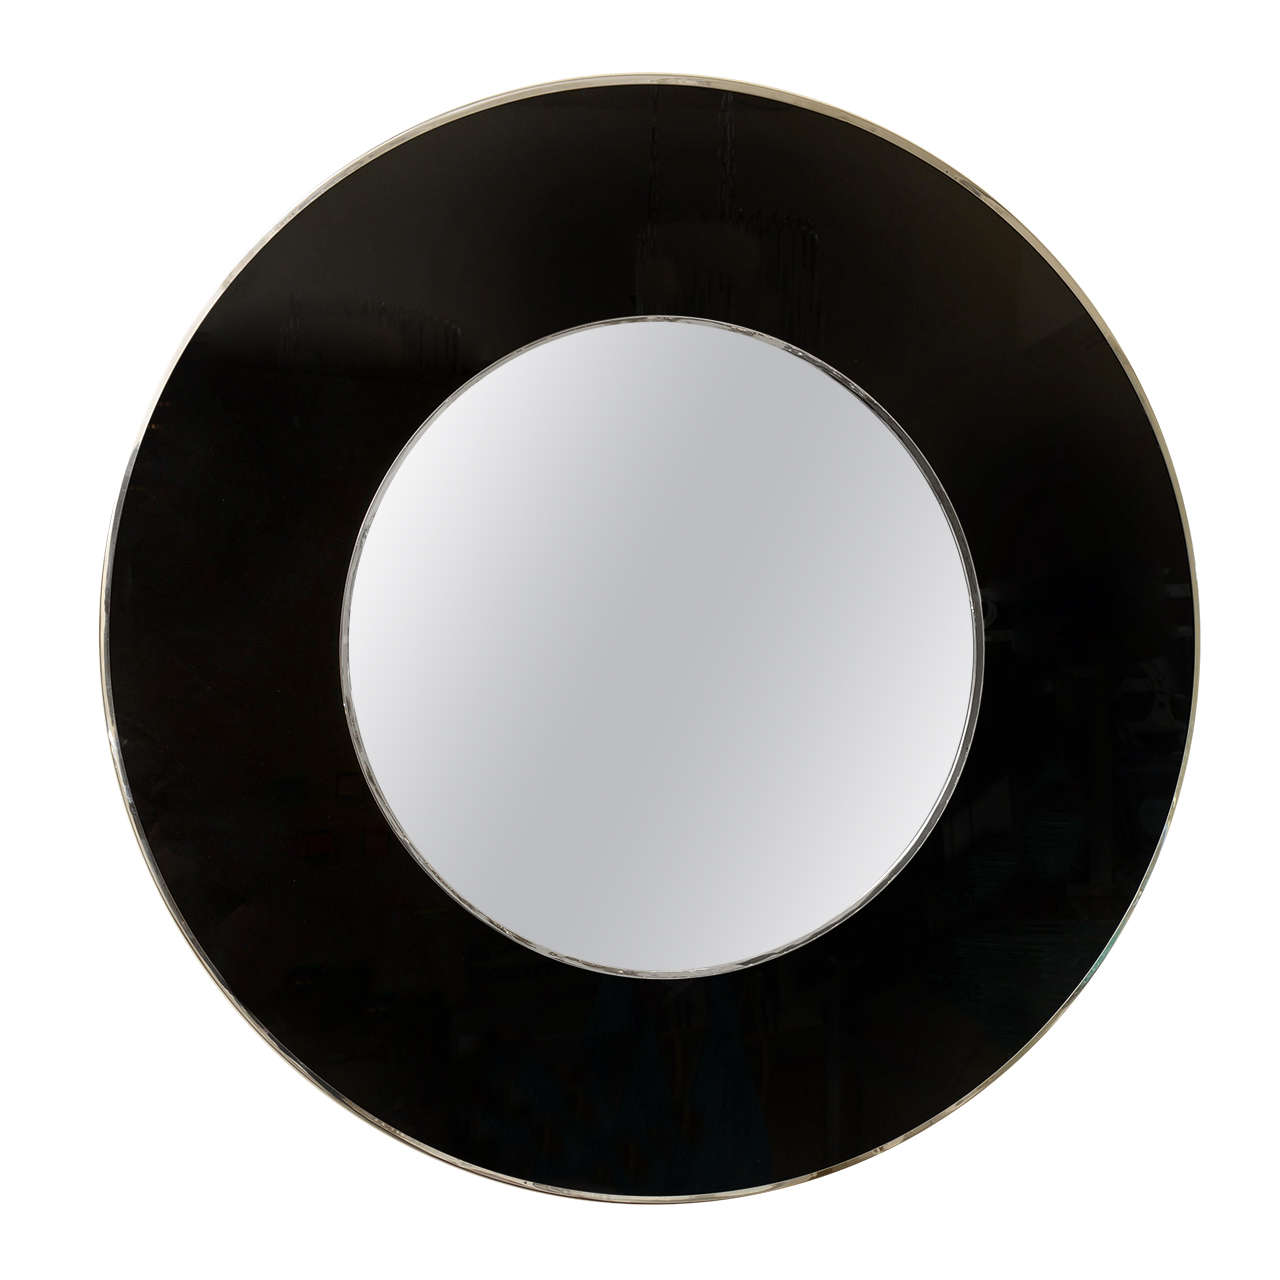 Monumental Circular Black Glass and Banded Stainless Steel Mirror